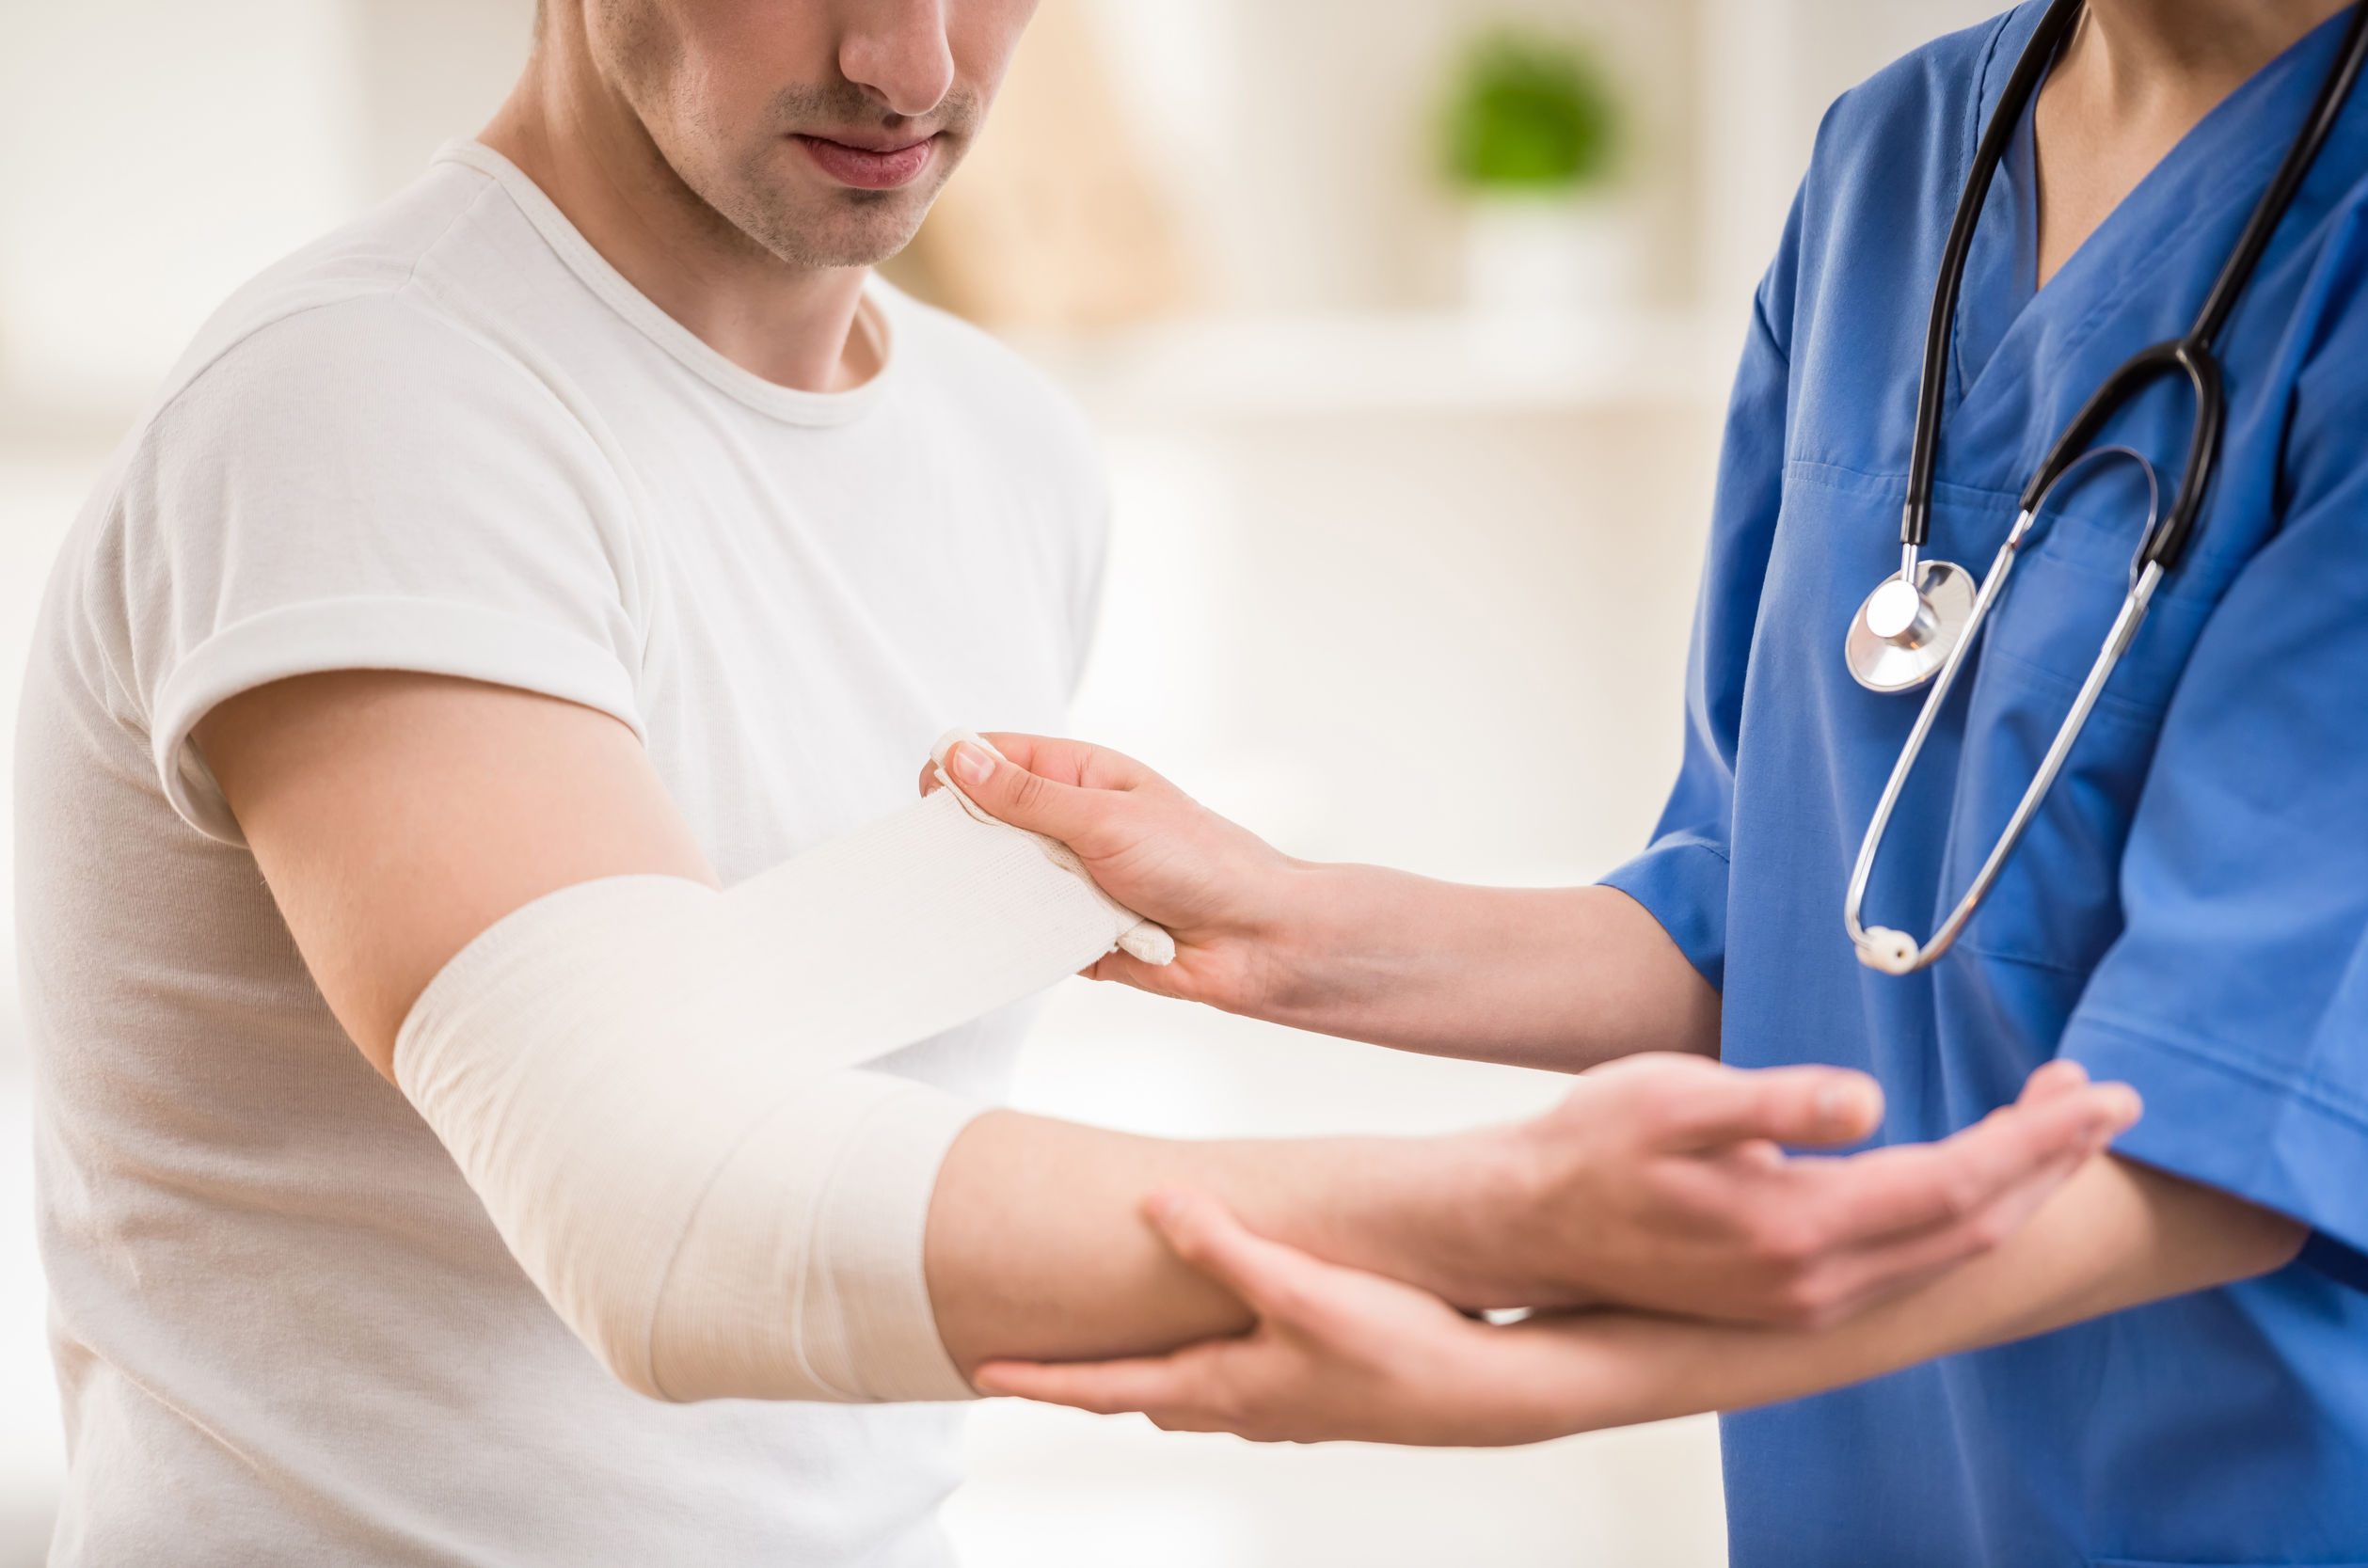 Florida Personal Injury Claims: What Kinds of Damages Can You Sue for?